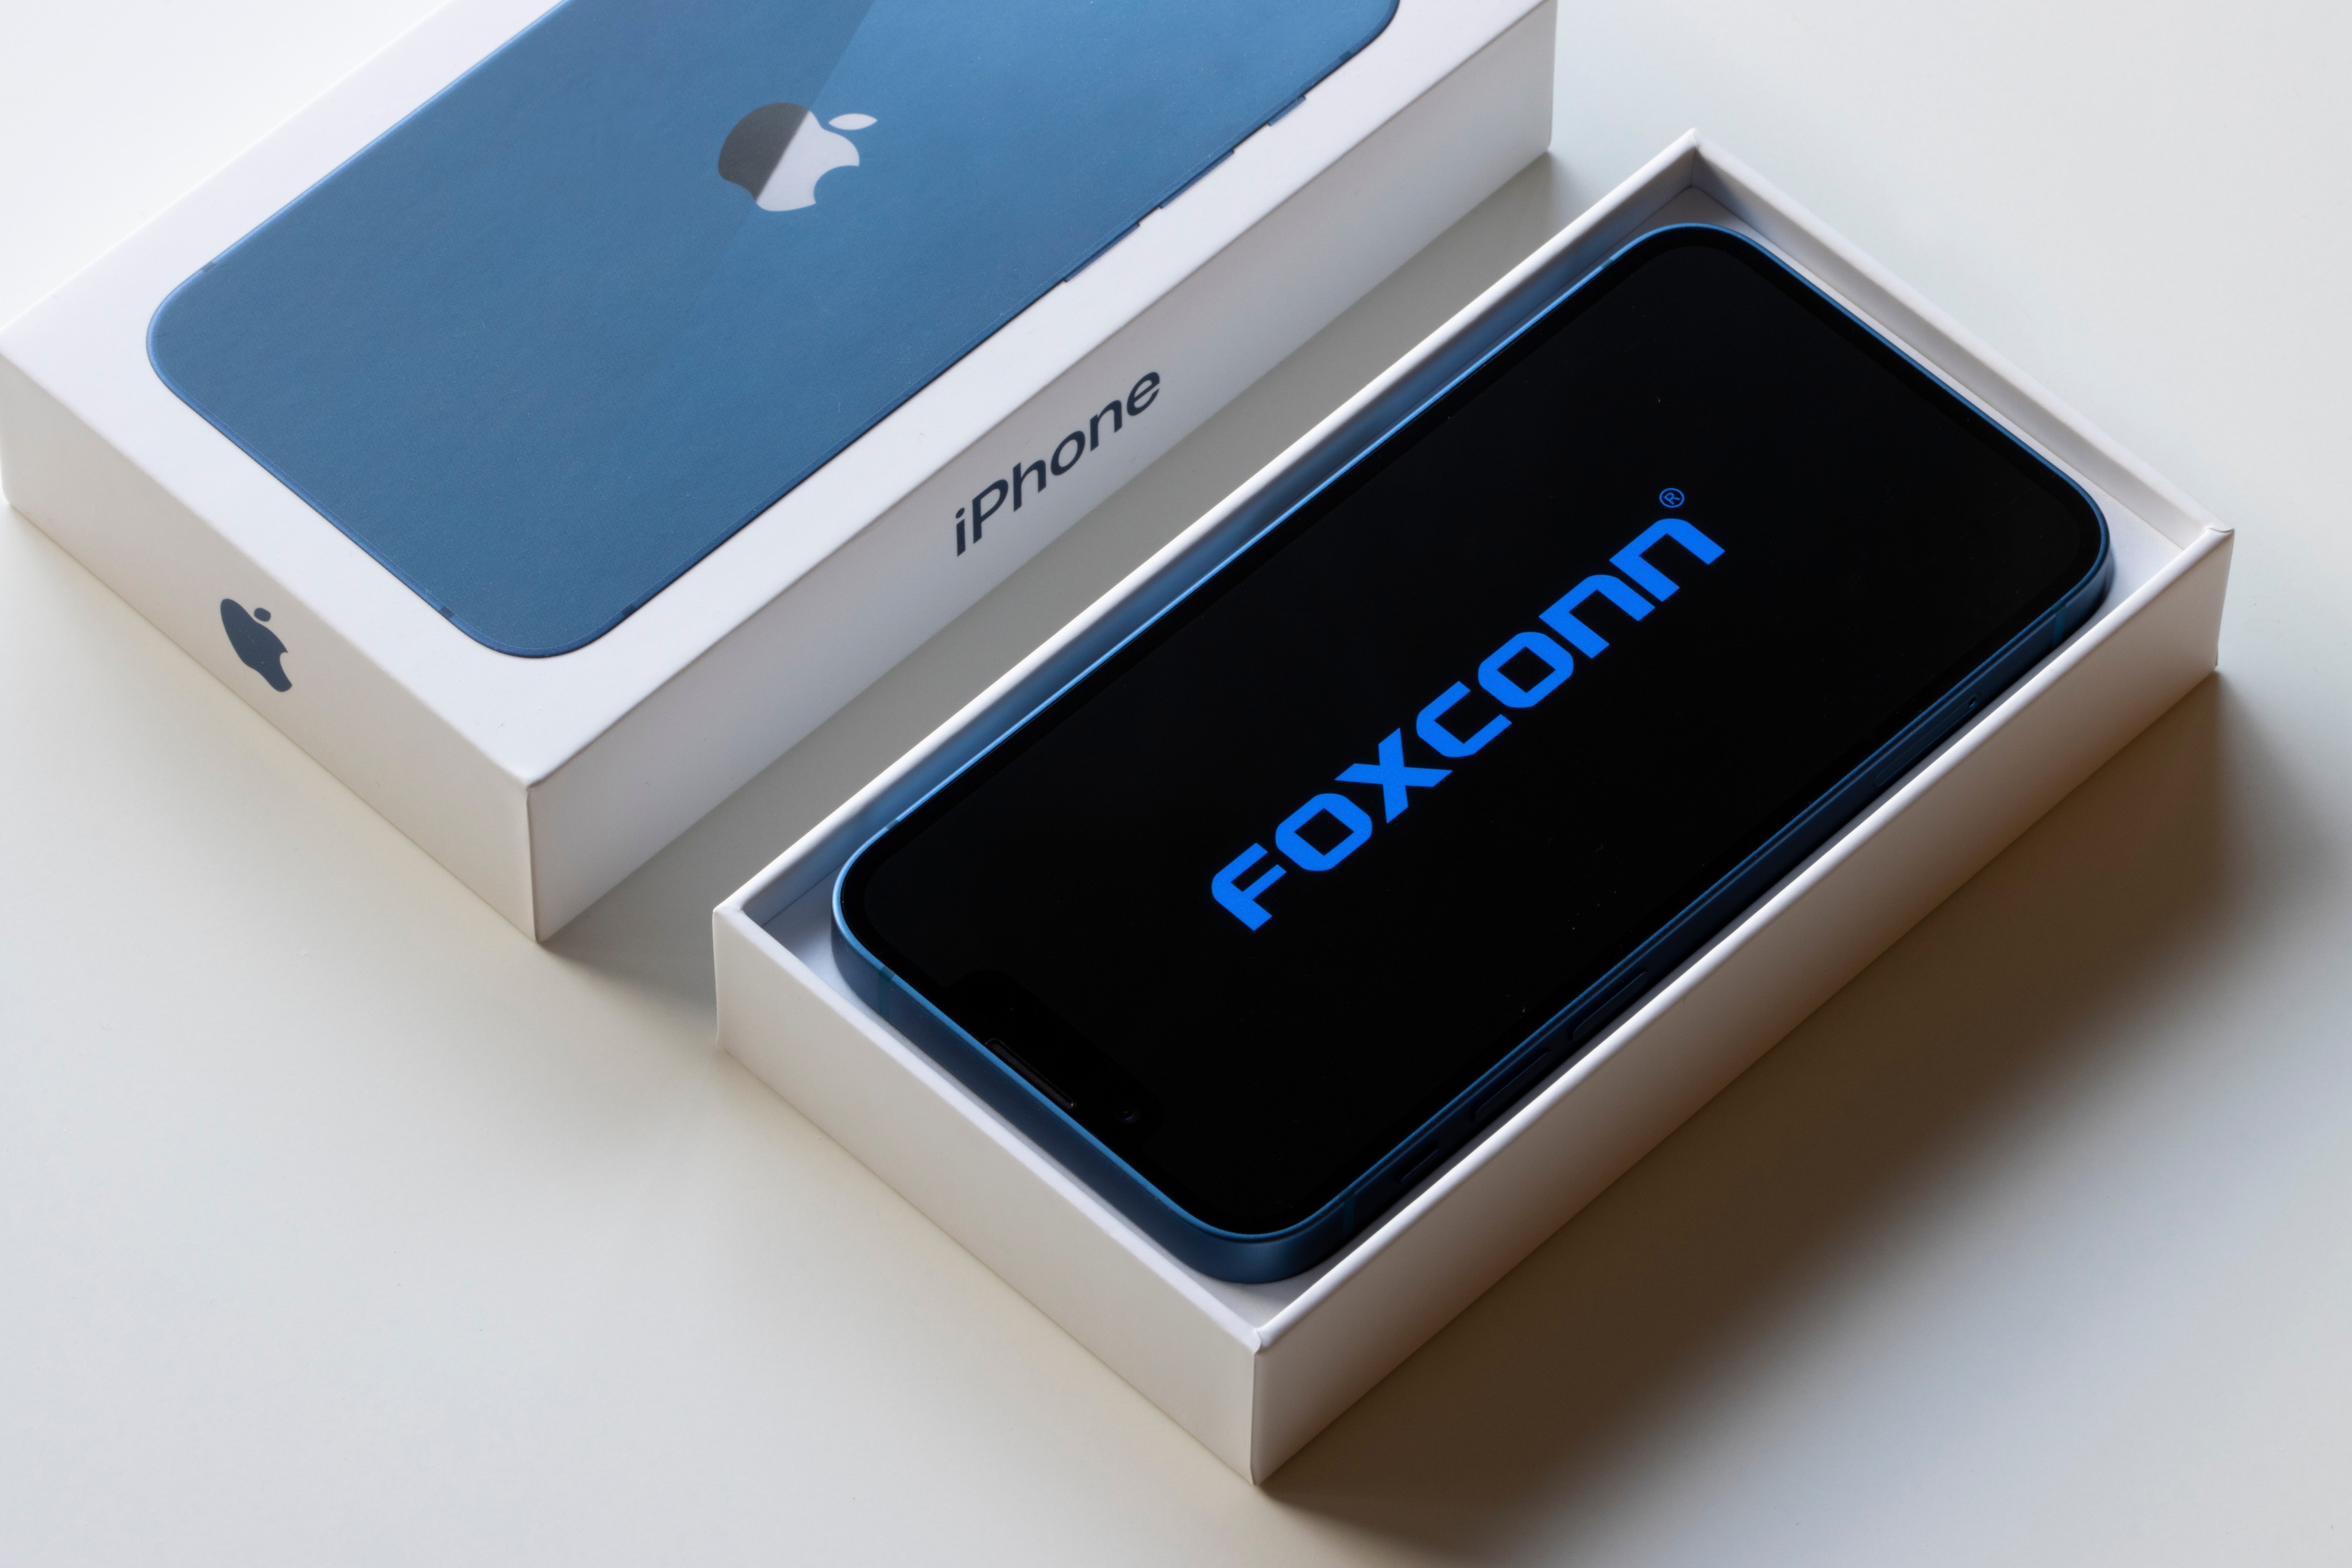 Foxconn Technology Group said a worker at its iPhone factory in the central city of Zhengzhou can earn more than 15,000 yuan in extra pay for a full month’s attendance. Photo: Shutterstock